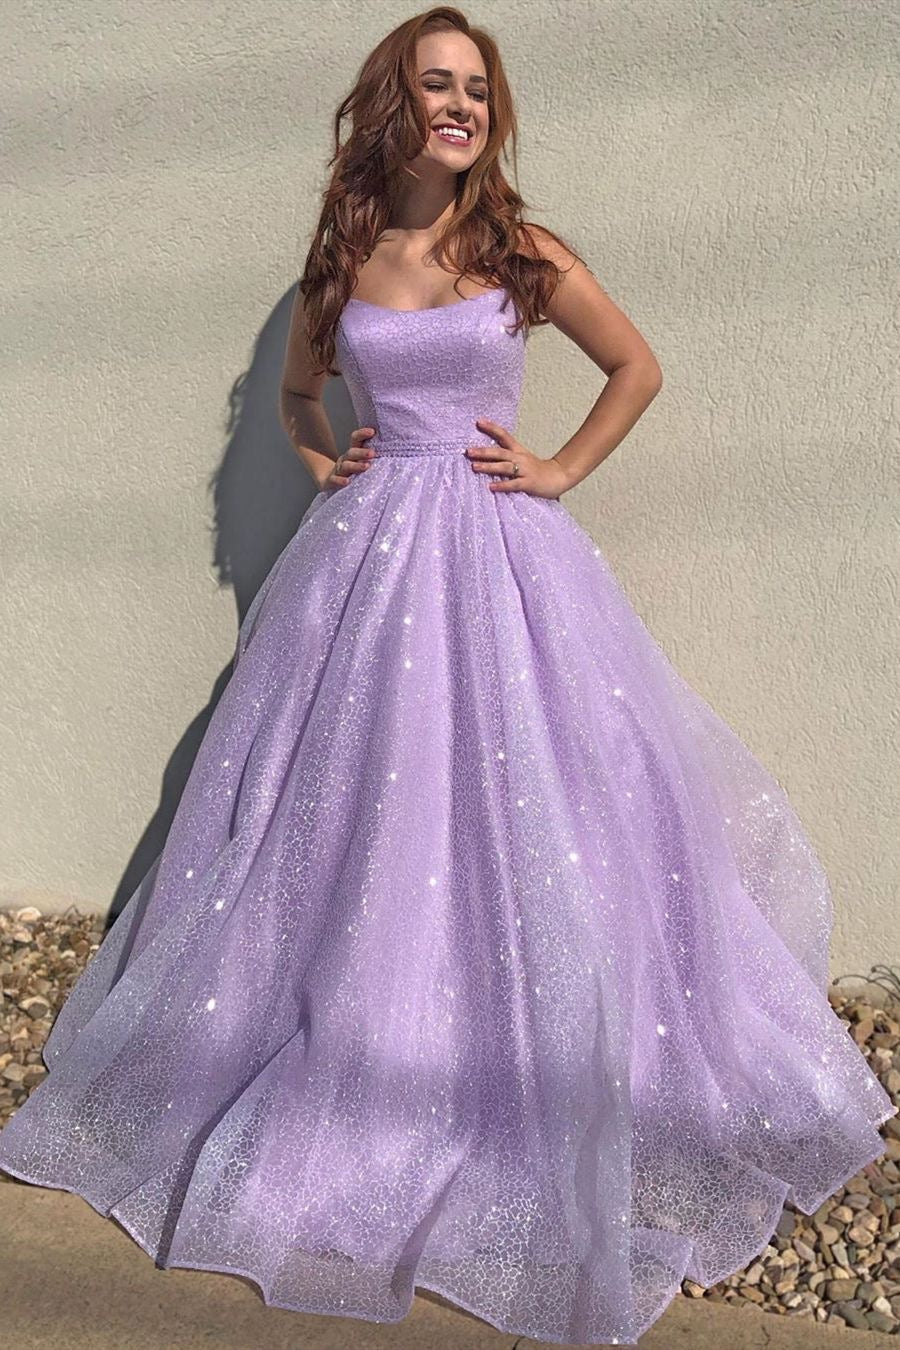 Sparkly Spaghetti Straps Lilac Long Prom Dresses With Sequins MP01 ...